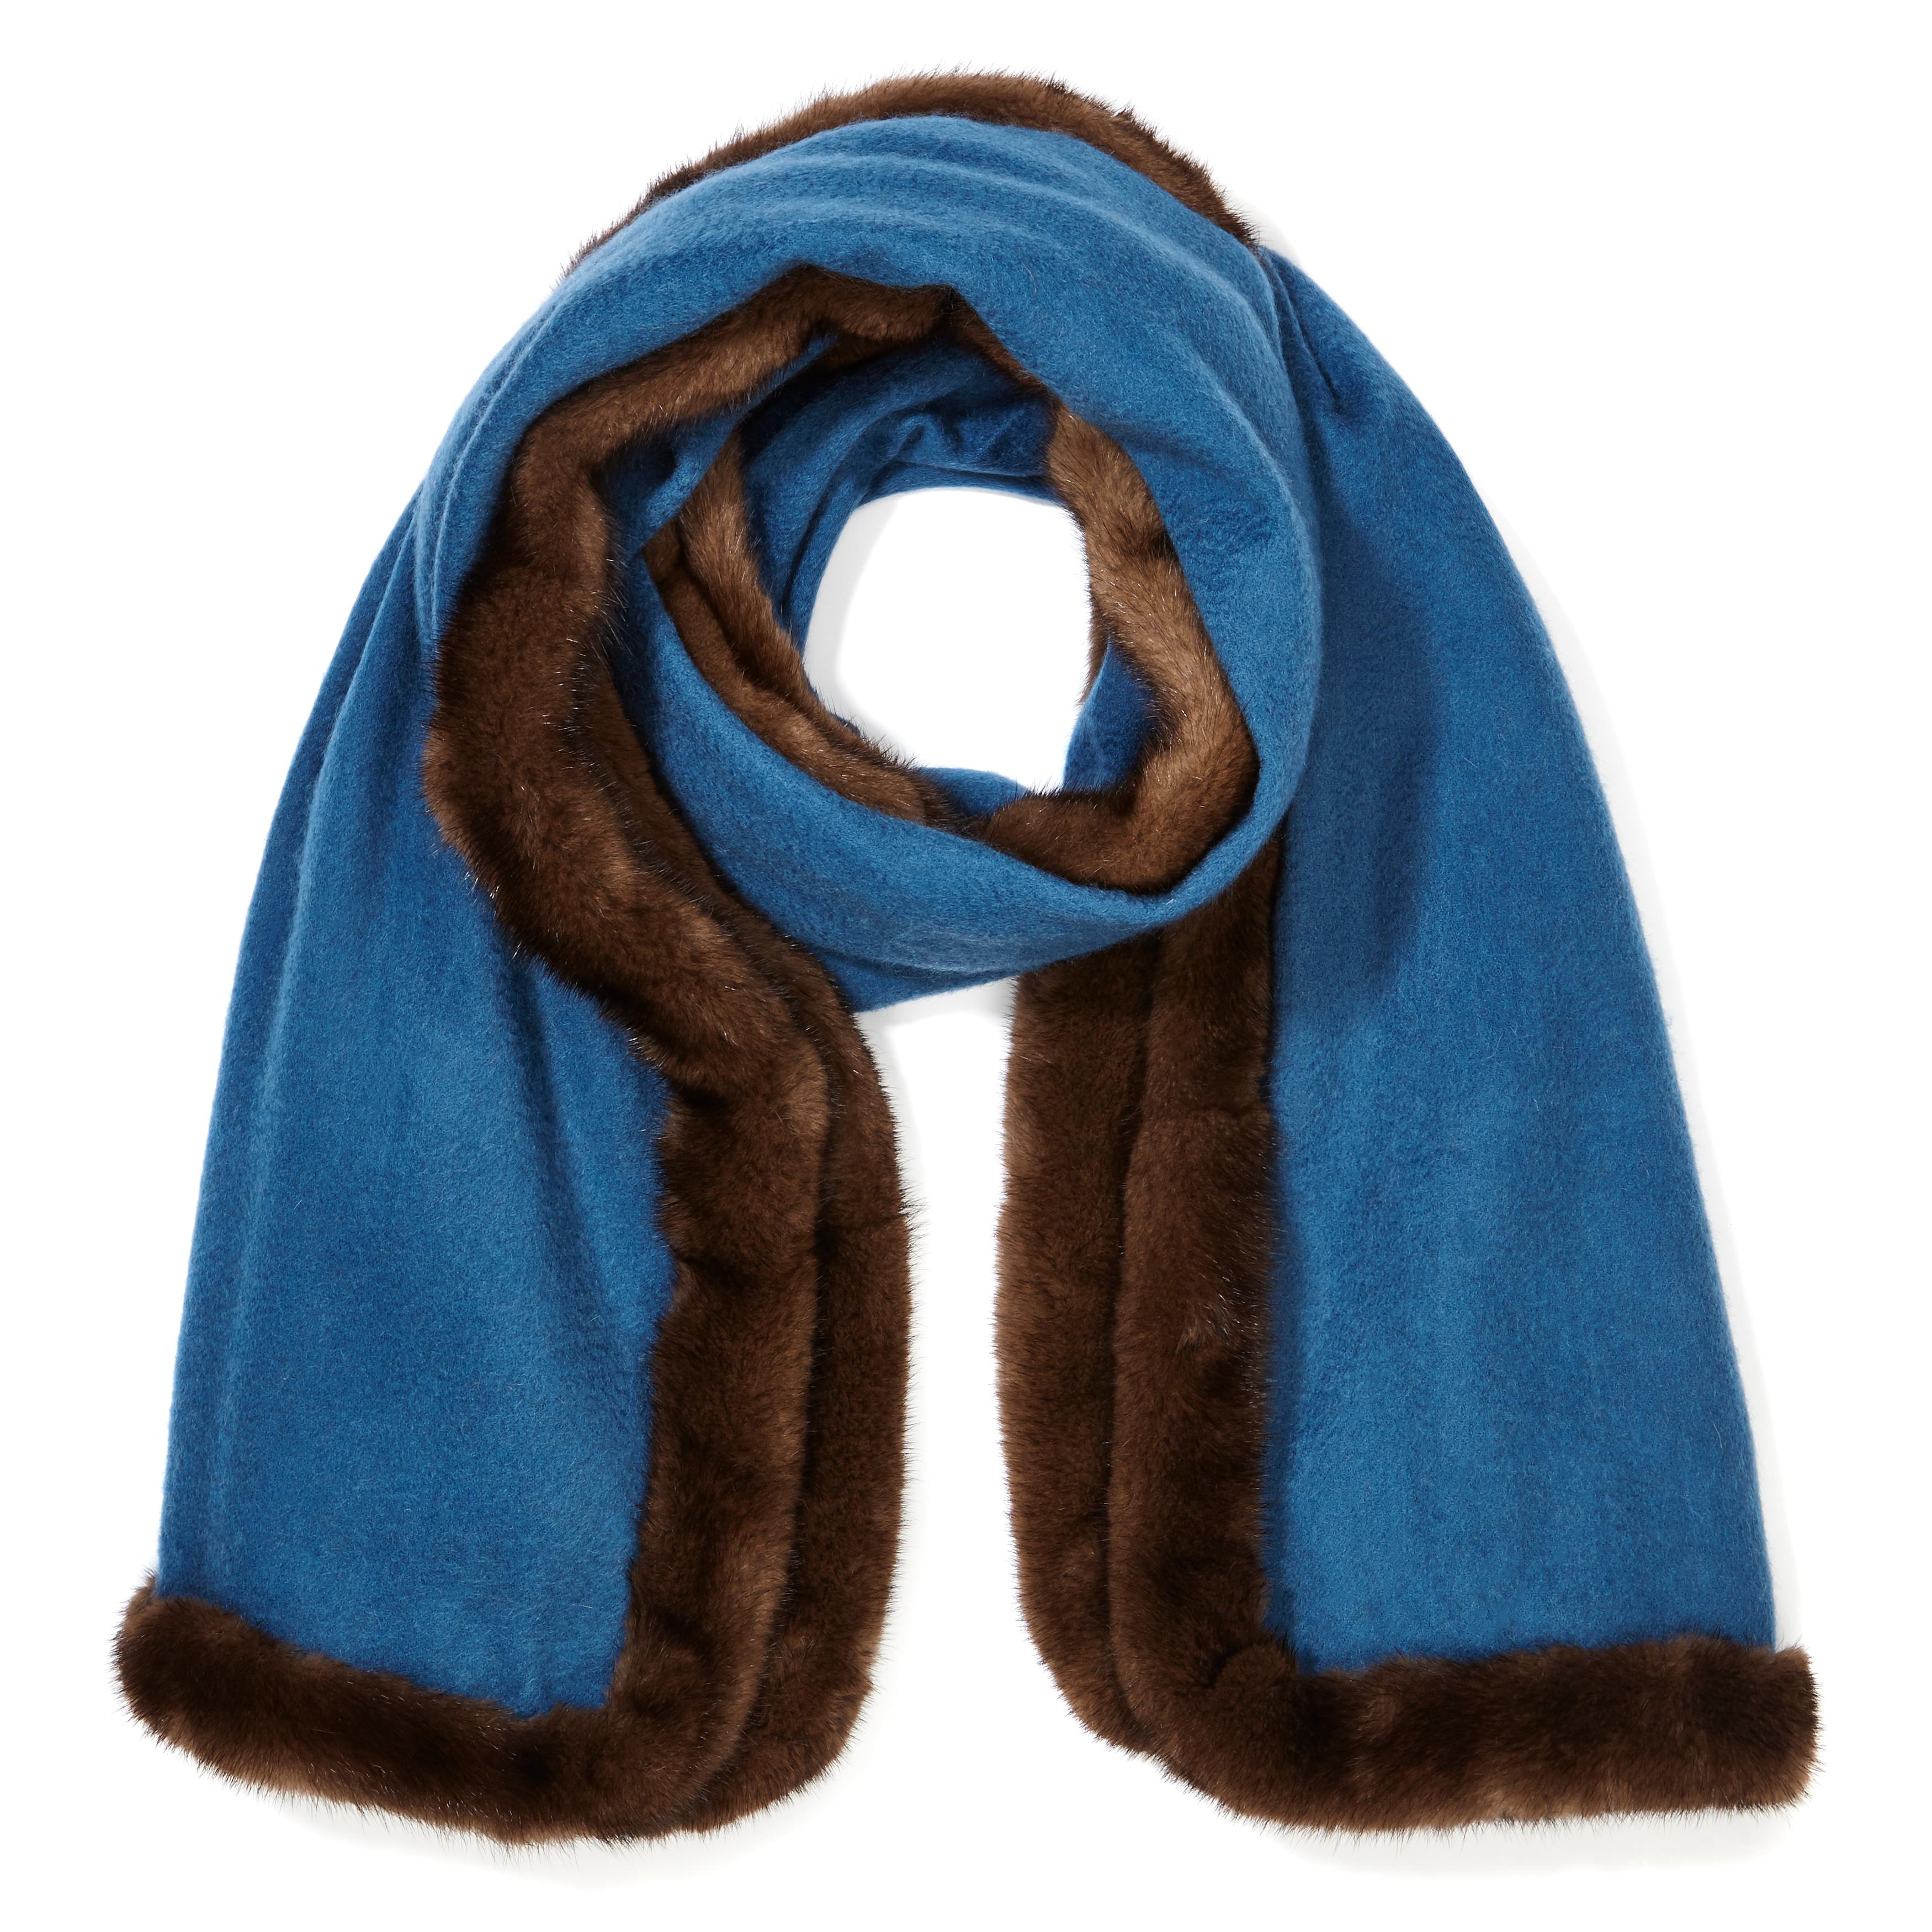 Verheyen London Mink Fur Trimmed Cashmere Scarf in Blue & Brown - Brand New

Verheyen London’s shawl is spun from the finest Scottish woven cashmere and finished with the most exquisite dyed mink. Its warmth envelopes you with luxury, perfect for